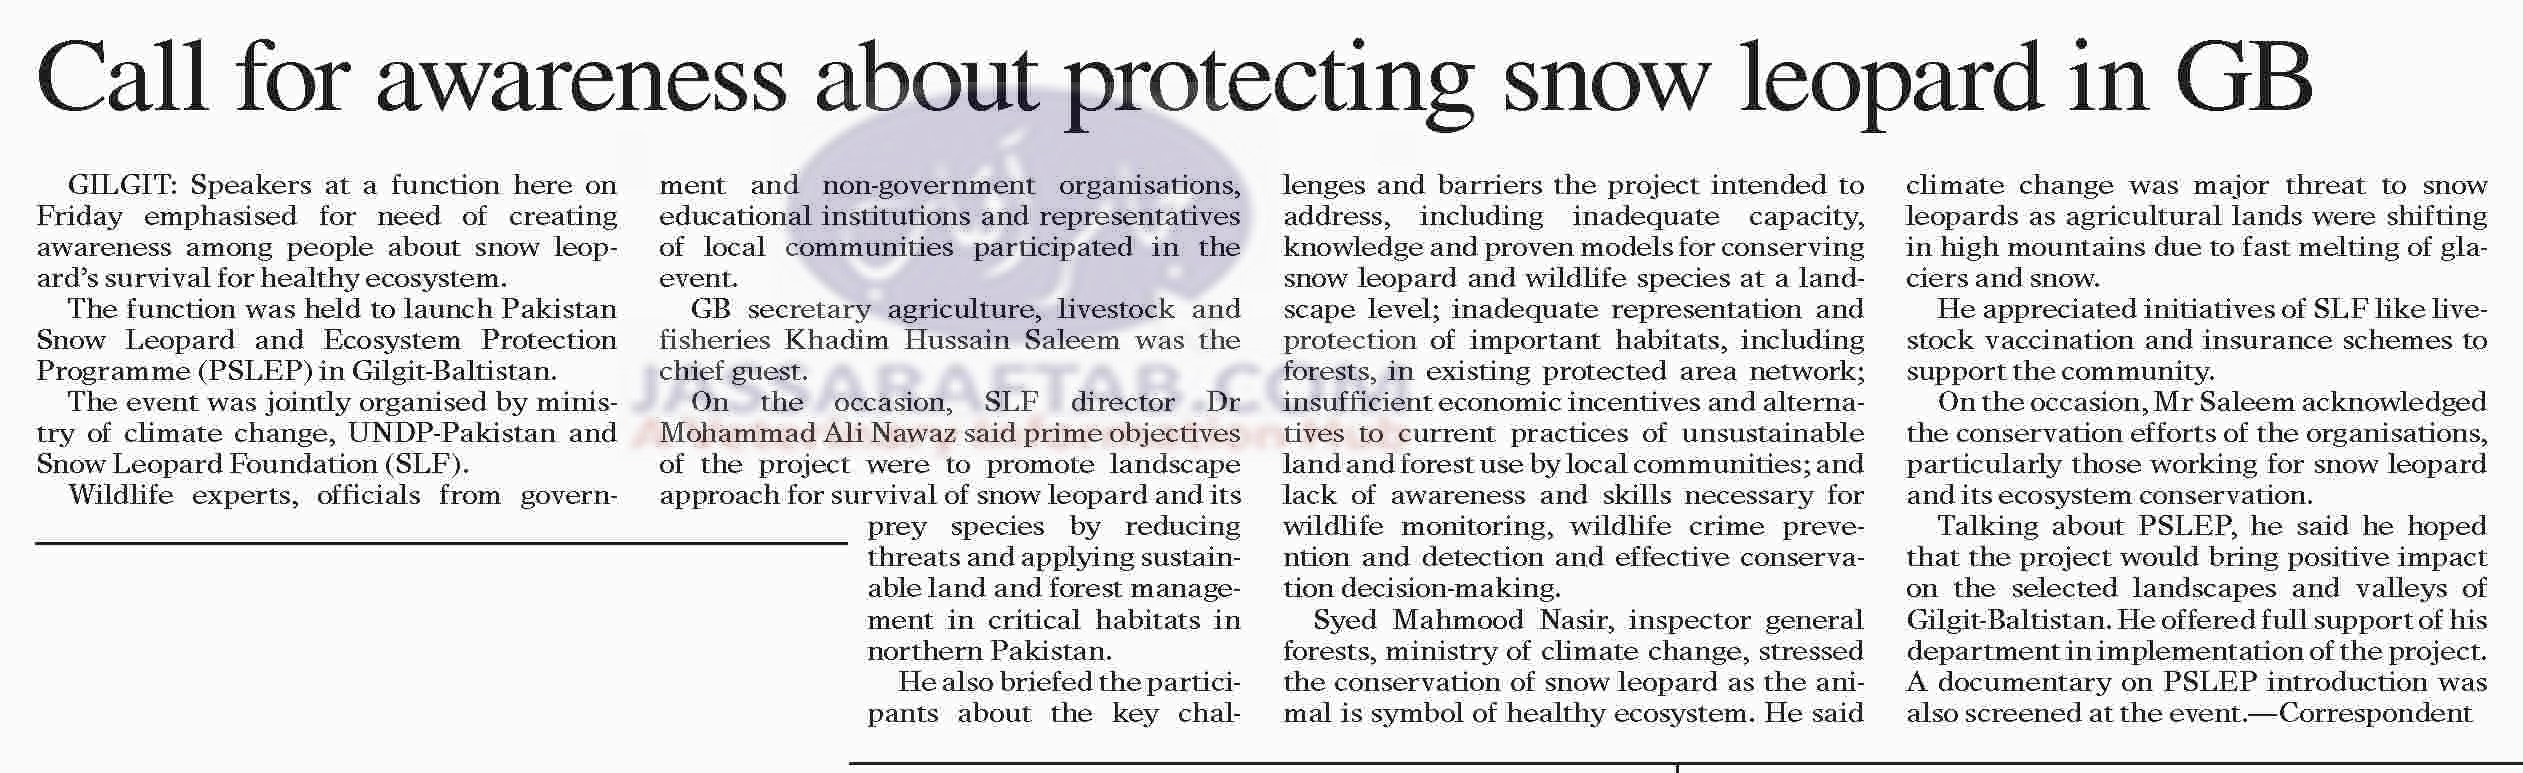 Protection of snow leopard in Gilgit Baltistan by UNDP Pakistan and Snow Leopard Foundation.